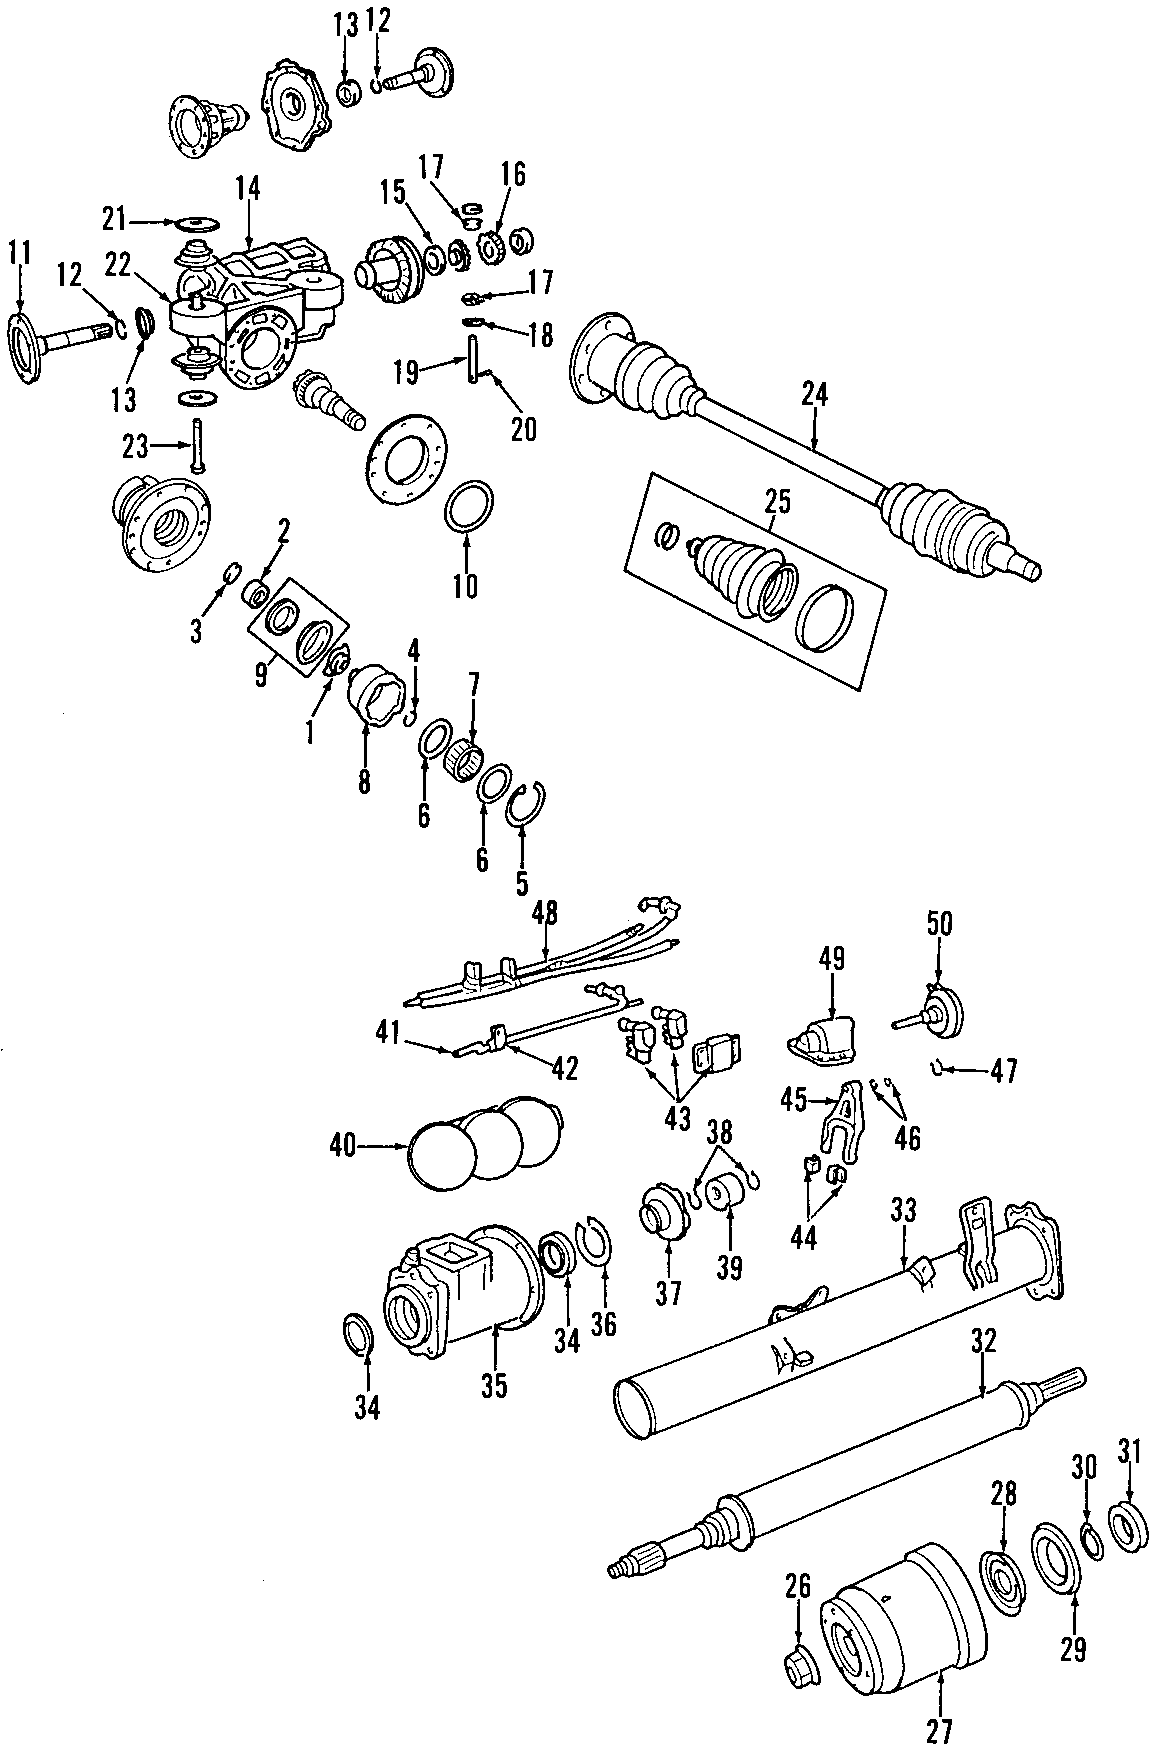 41DRIVE AXLES. REAR AXLE. AXLE SHAFTS & JOINTS. DIFFERENTIAL. PROPELLER SHAFT.https://images.simplepart.com/images/parts/motor/fullsize/T040085.png